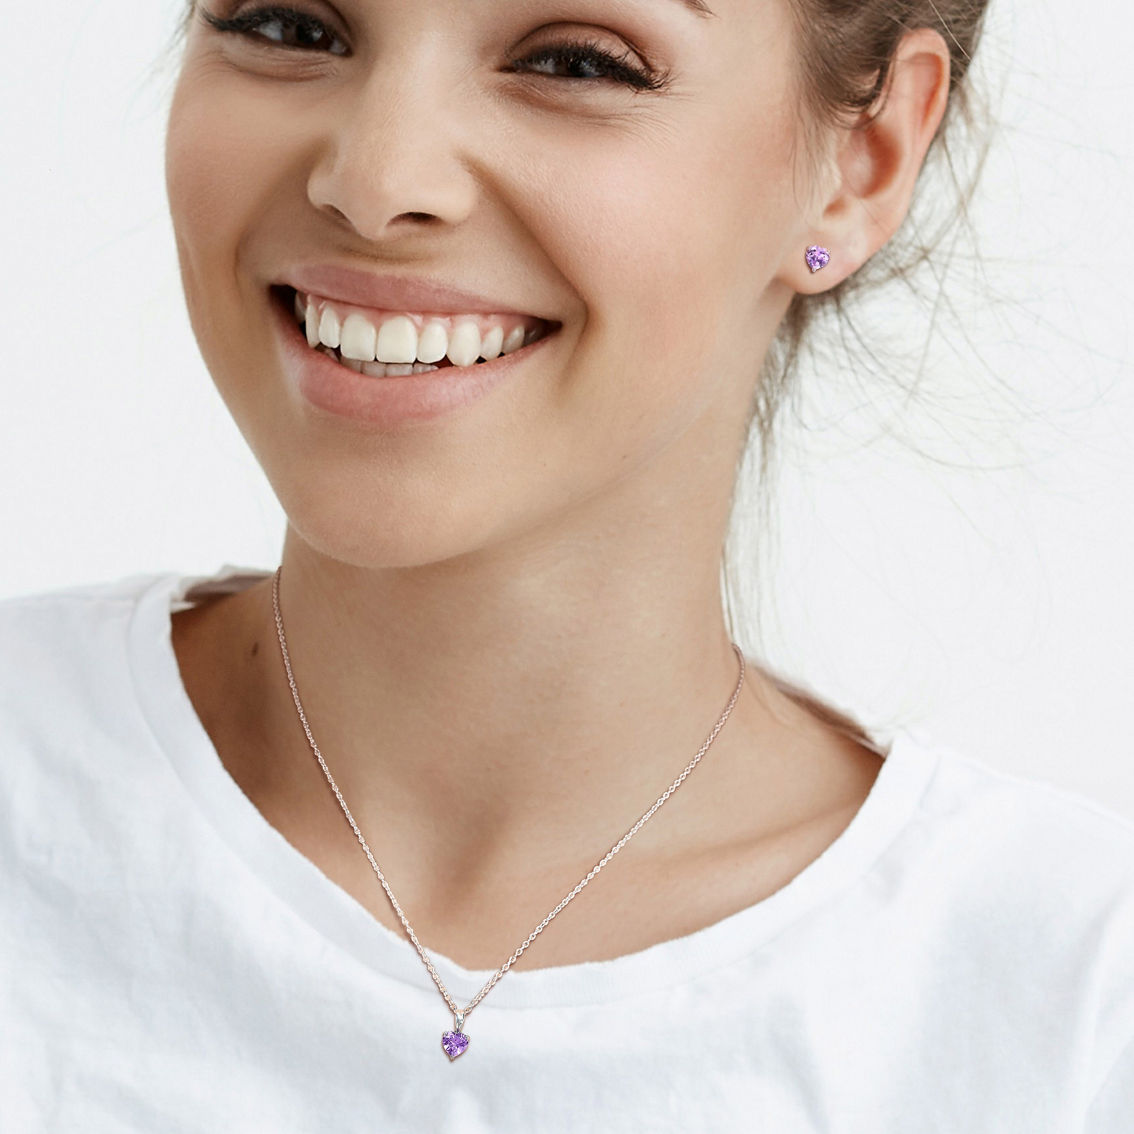 Sofia B. Sterling Silver Amethyst Solitaire Necklace and Earrings with Heart Design - Image 3 of 4